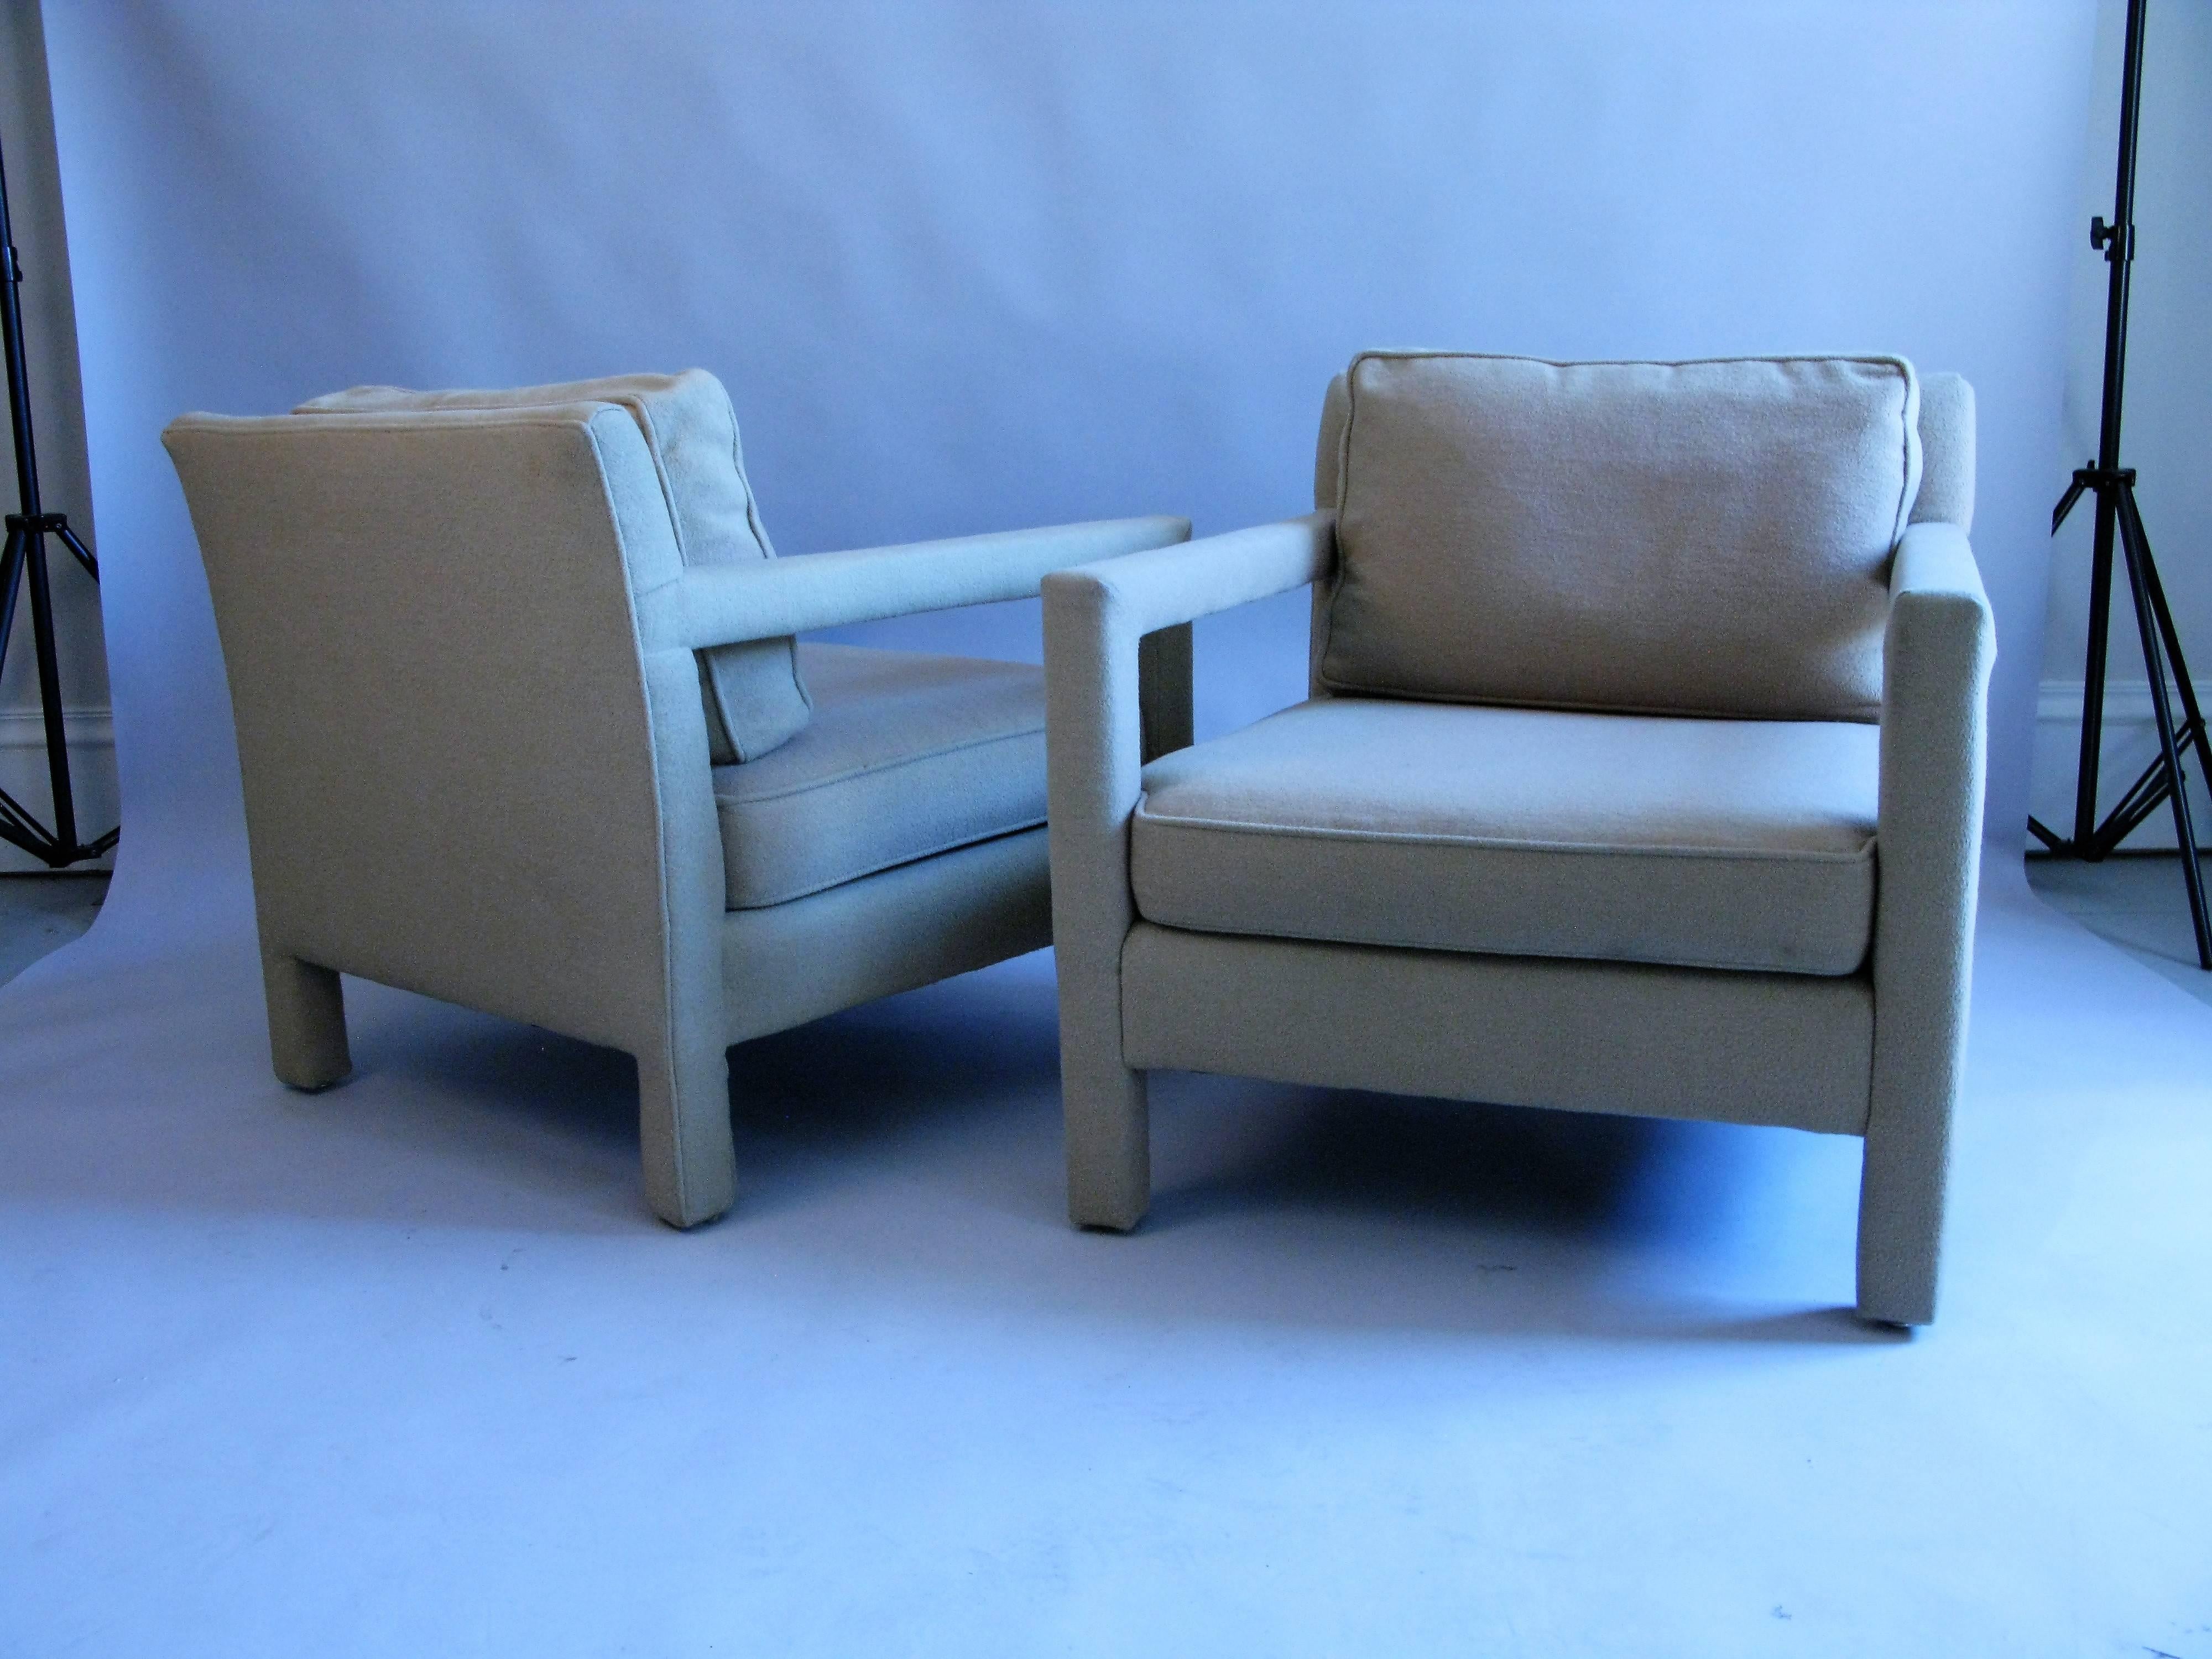 A very nice pair of comfortable upholstered Parsons chairs with wide and deep seats. The fabric is original cotton felt which is in very good condition, but has some discoloration from sun and use. The label is Bernhardt Furniture.